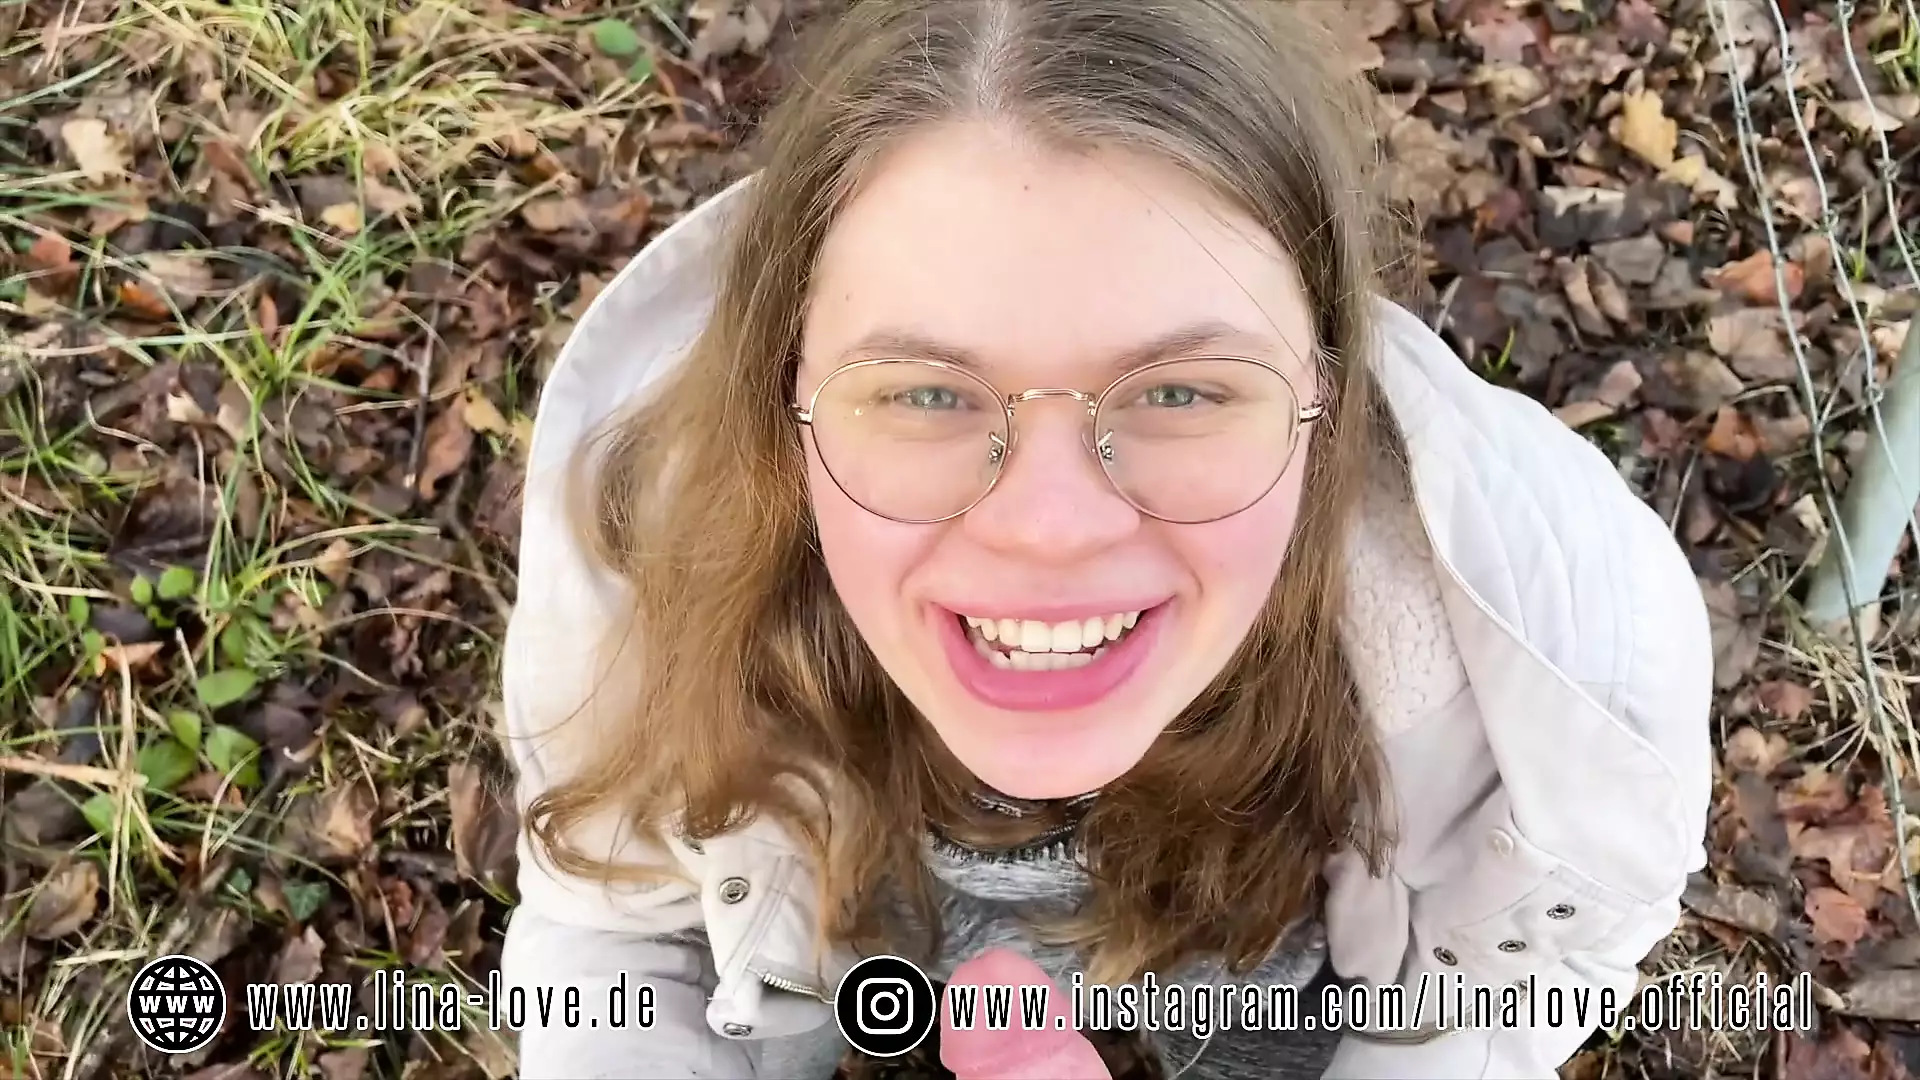 German 18yo Teens First Blowjob Outdoor picture